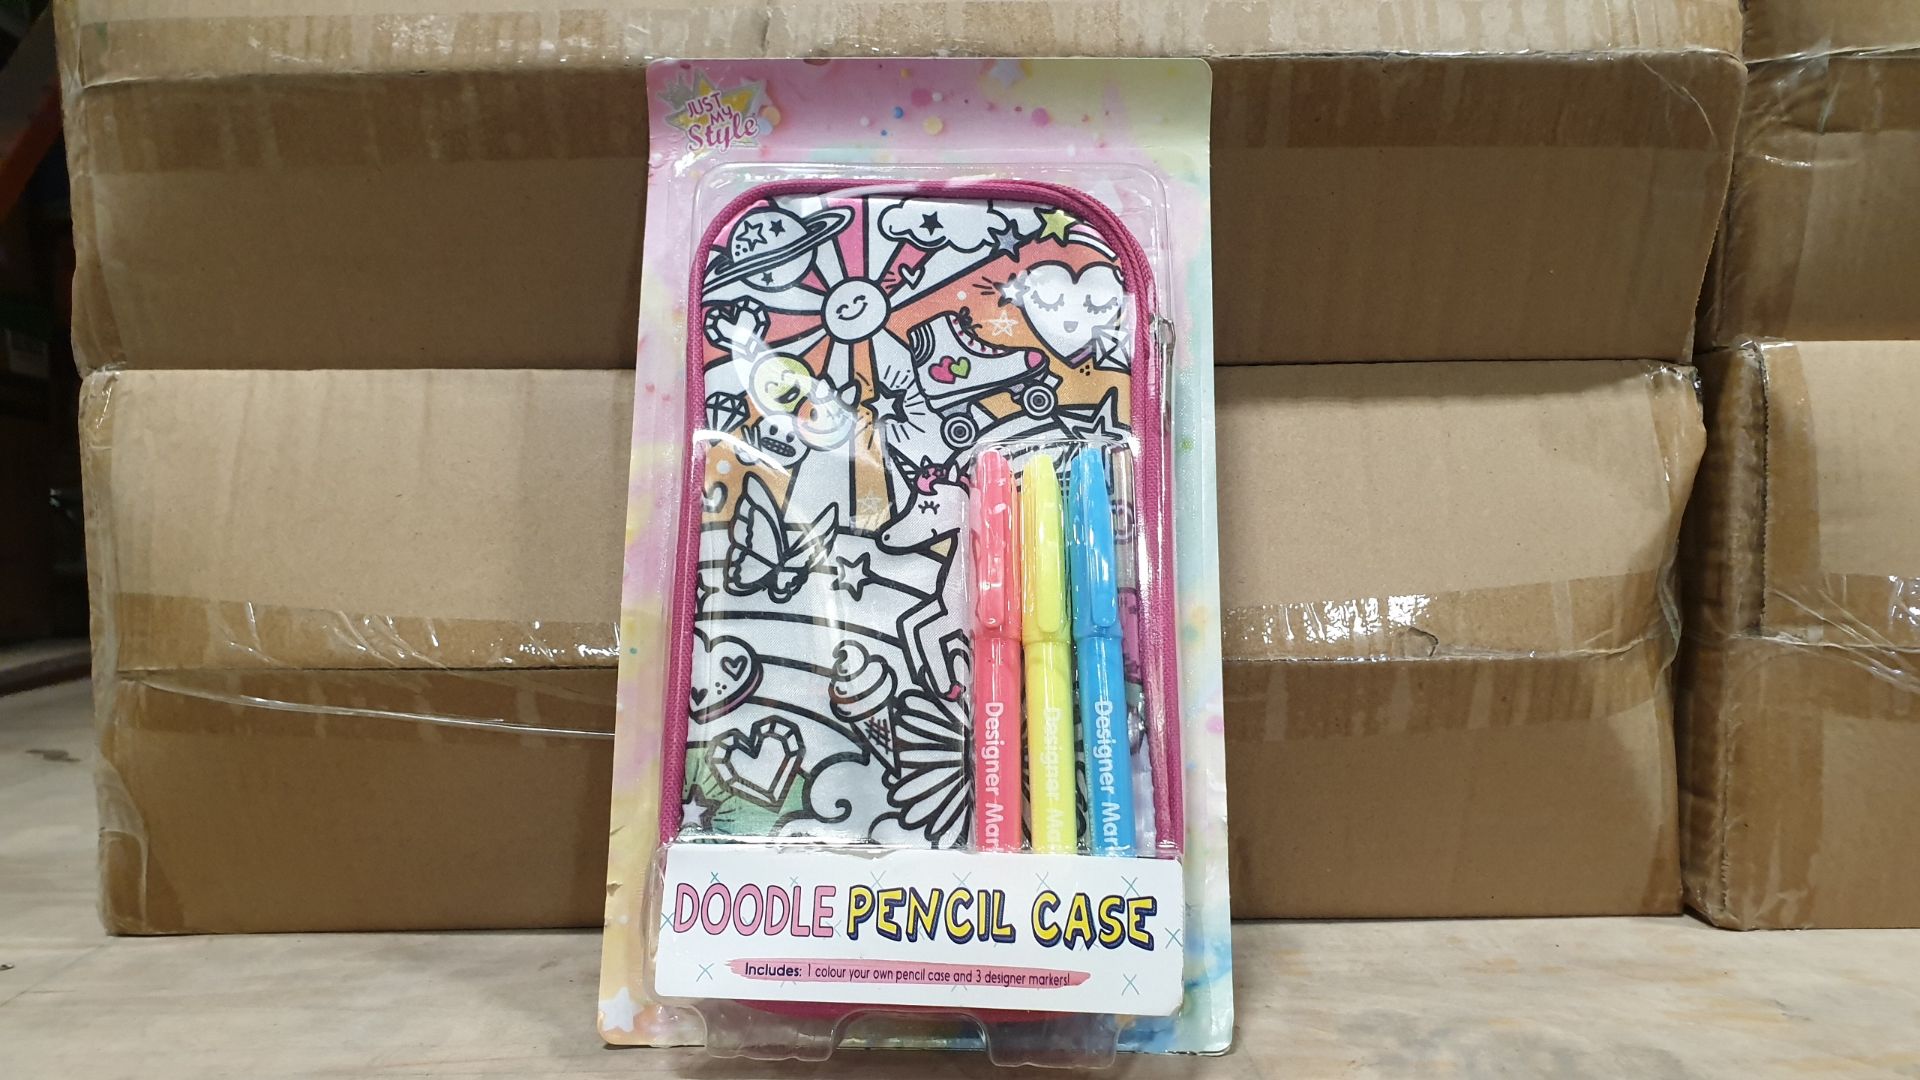 56 X BRAND NEW JUST MY STYLE DOODLE PENCIL CASE WITH CASE AND MARKERS ALL INDIVIDUALLY PACKAGED - IN